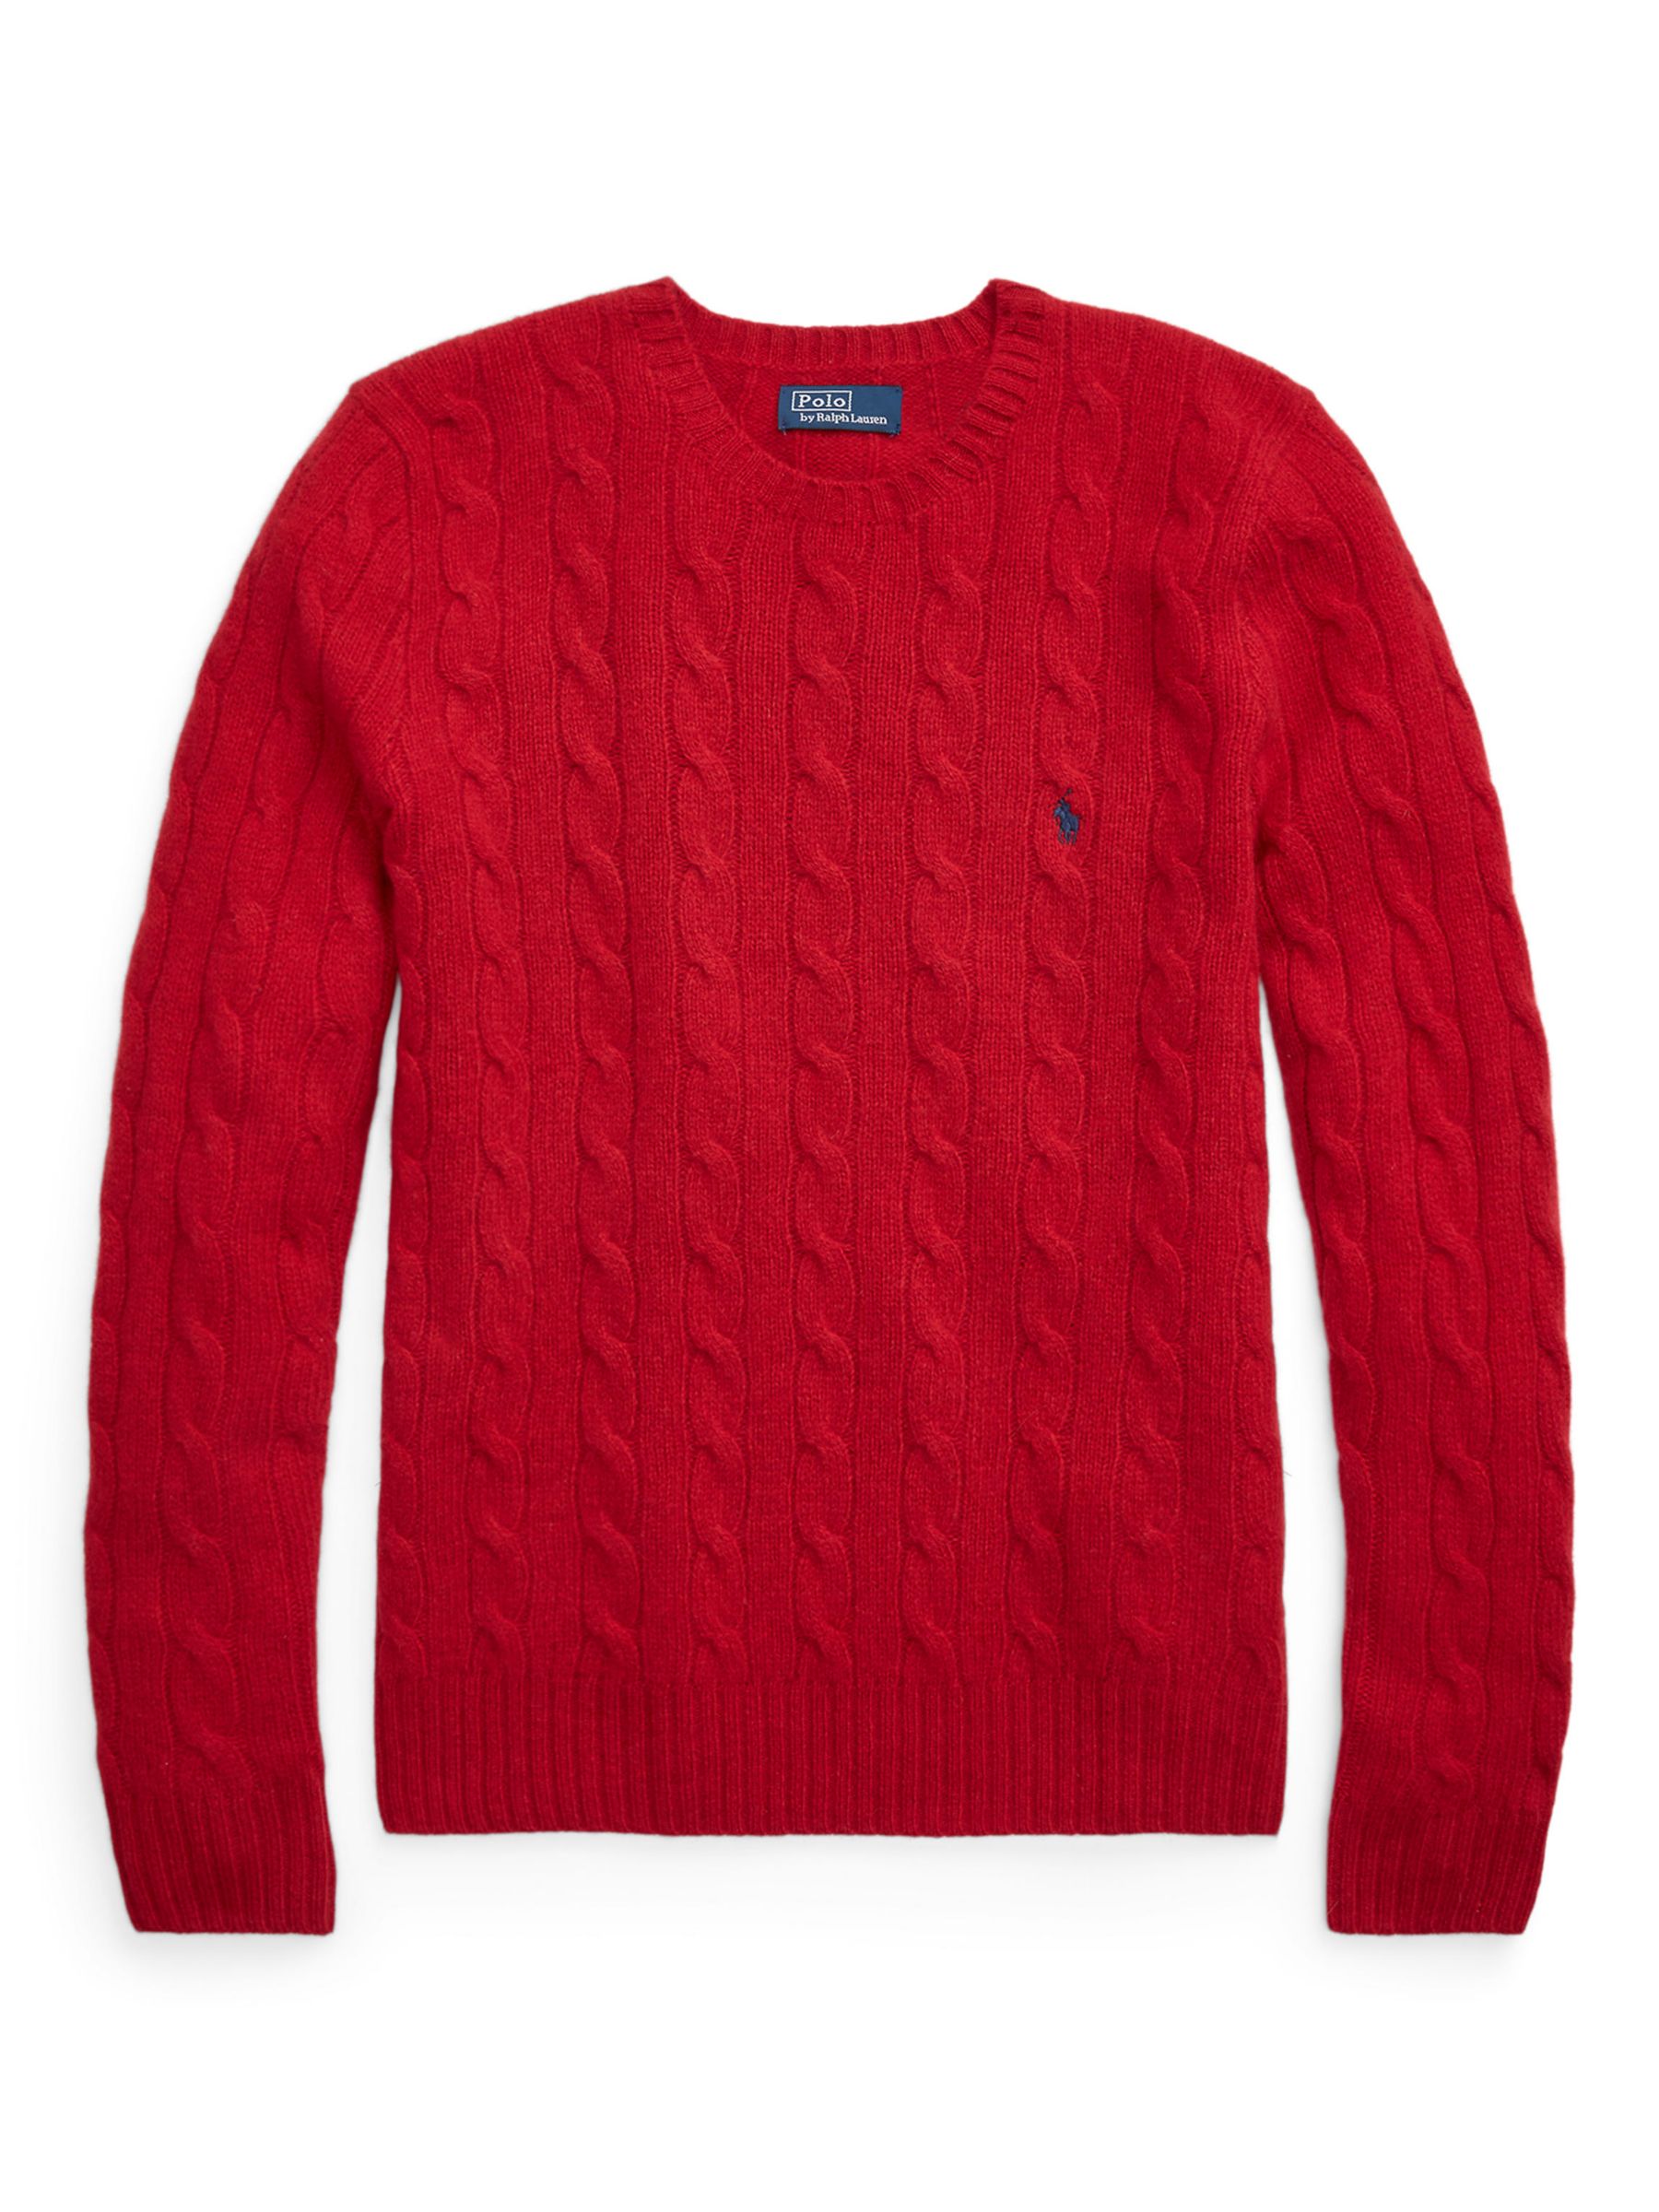 Polo Ralph Lauren Julianna Cotton Cable Knit Crewneck Jumper, Red at ...